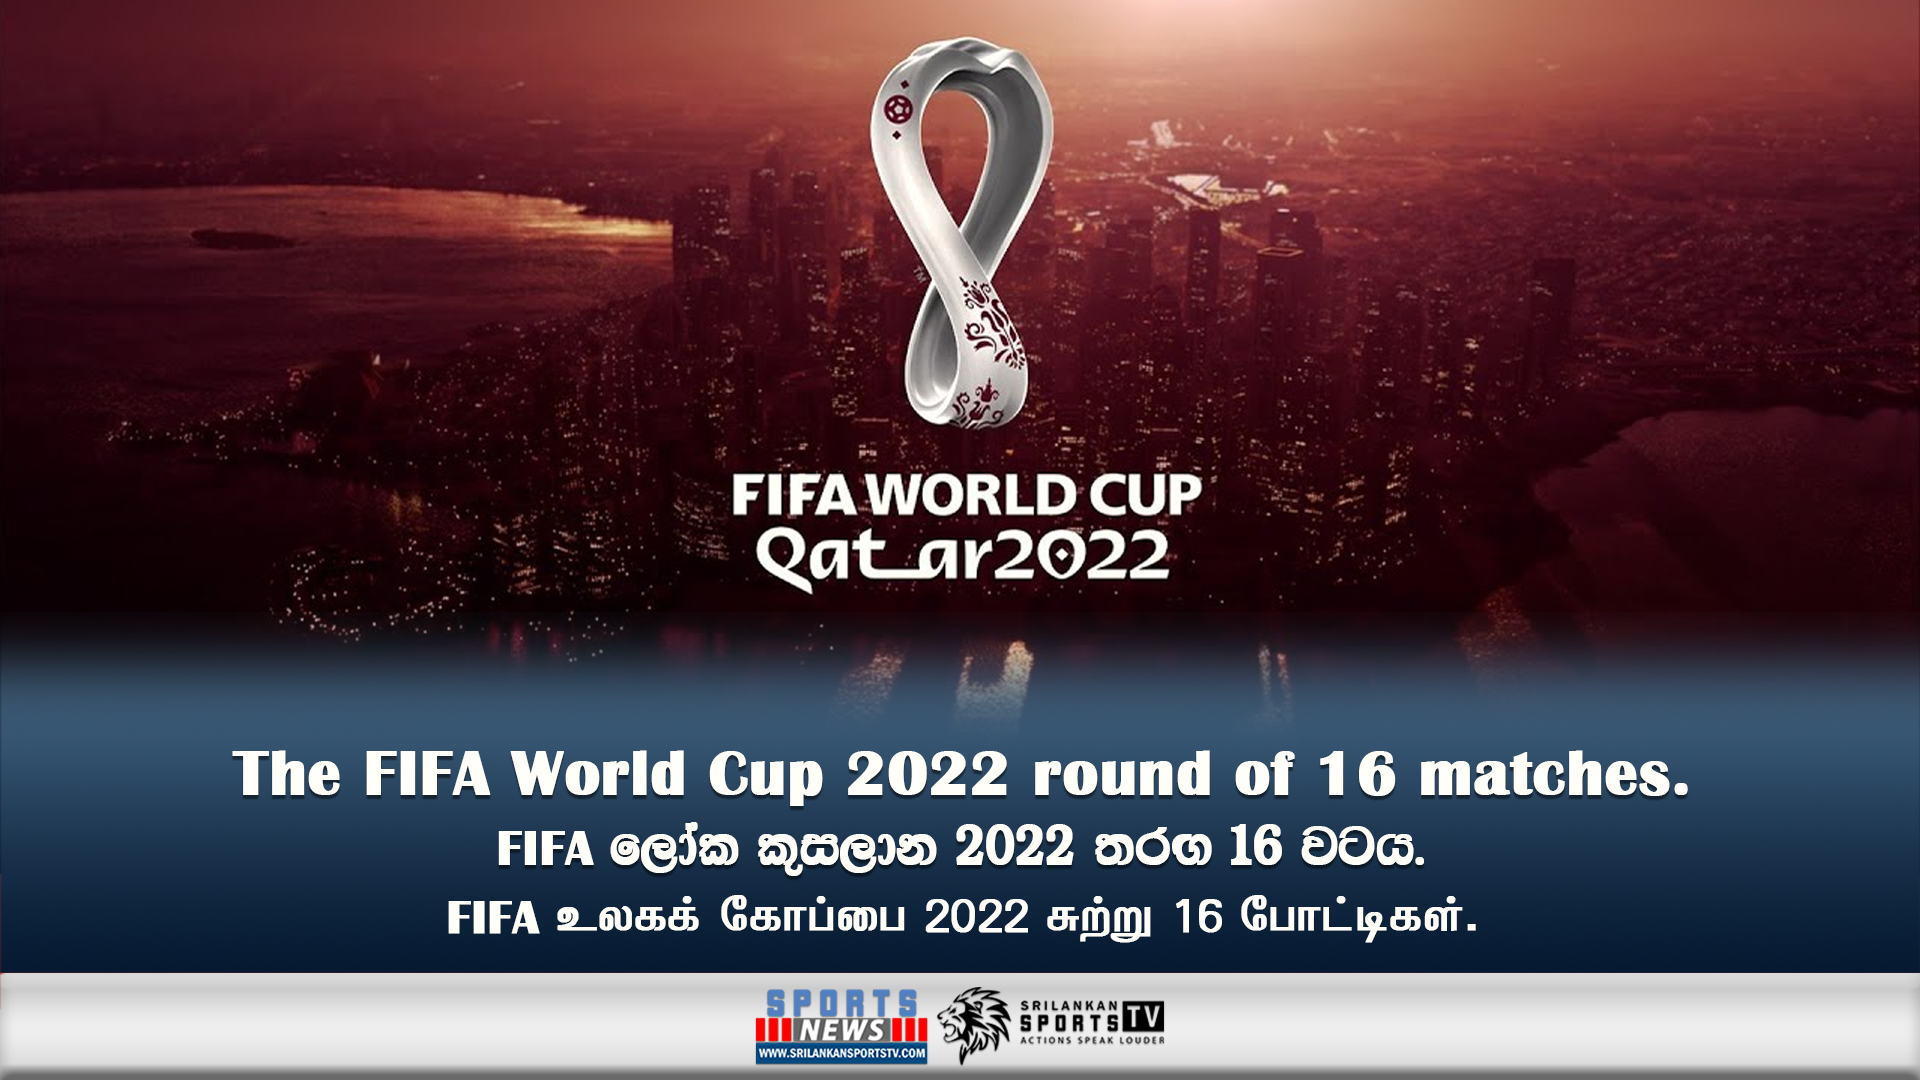 The FIFA World Cup 2022 round of 16 matches.